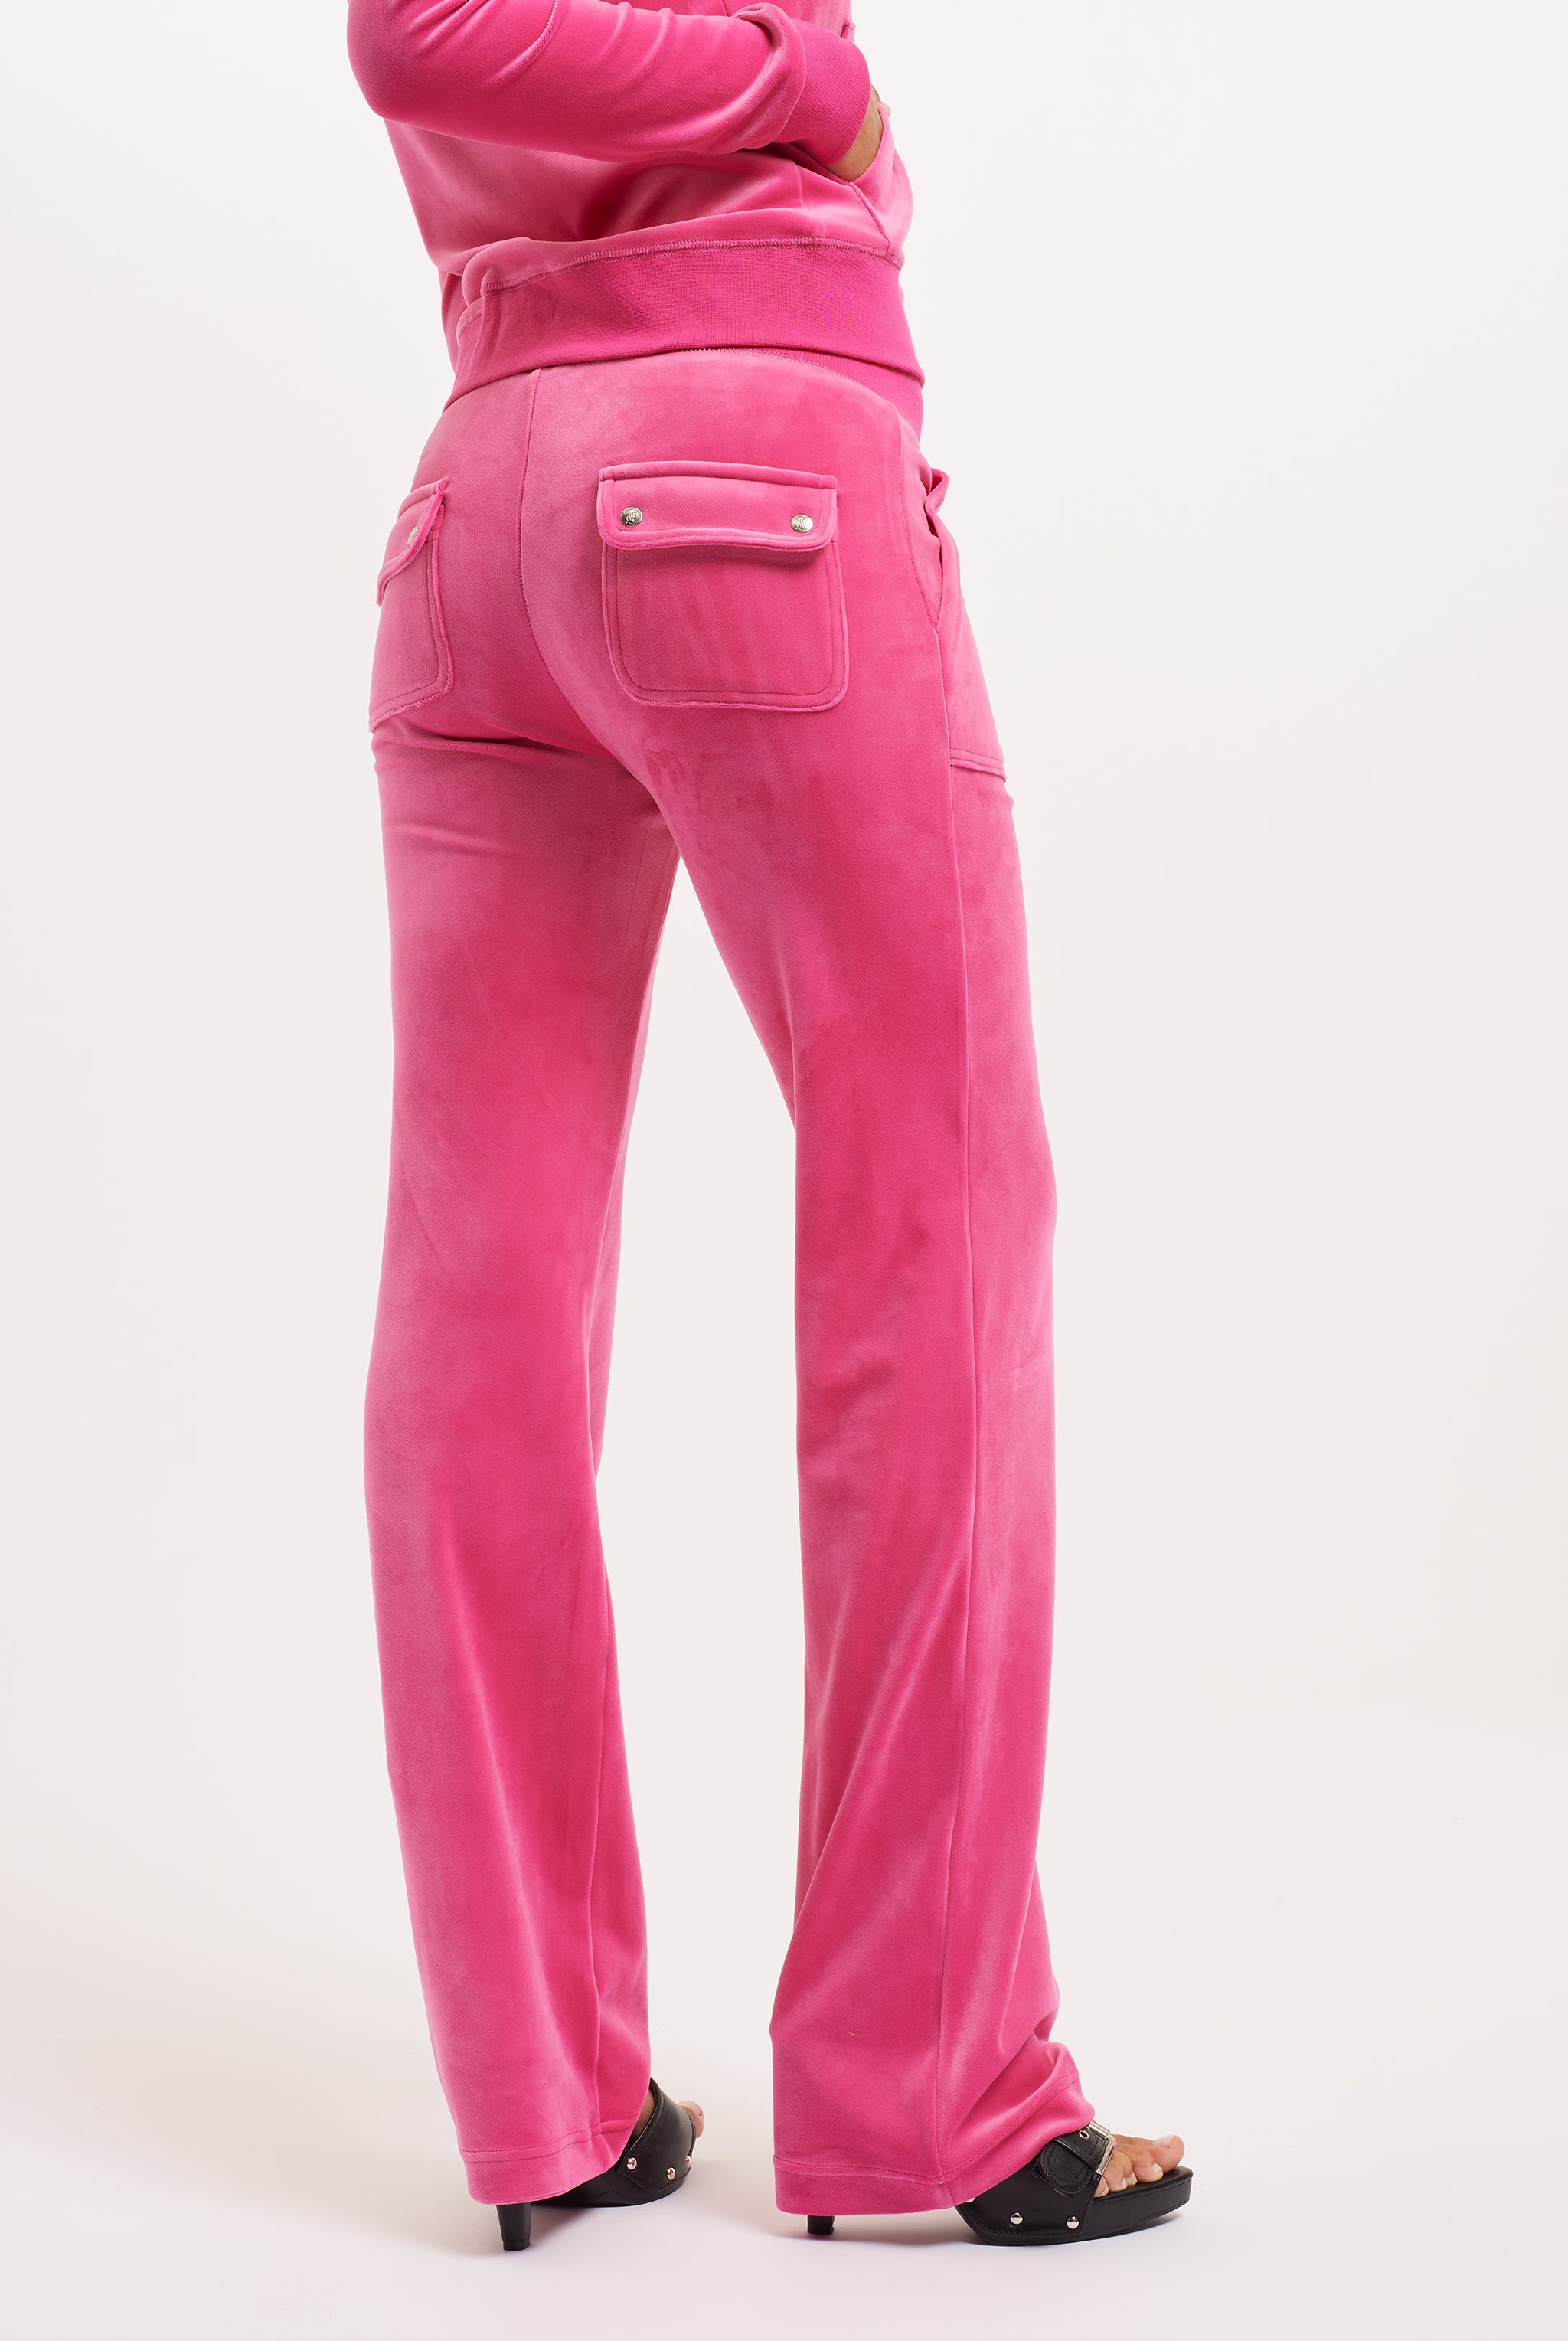 Juicy Couture Embellished Velour Track Pant  Juicy tracksuit, Pink juicy couture  track suit, Juicy couture track suit